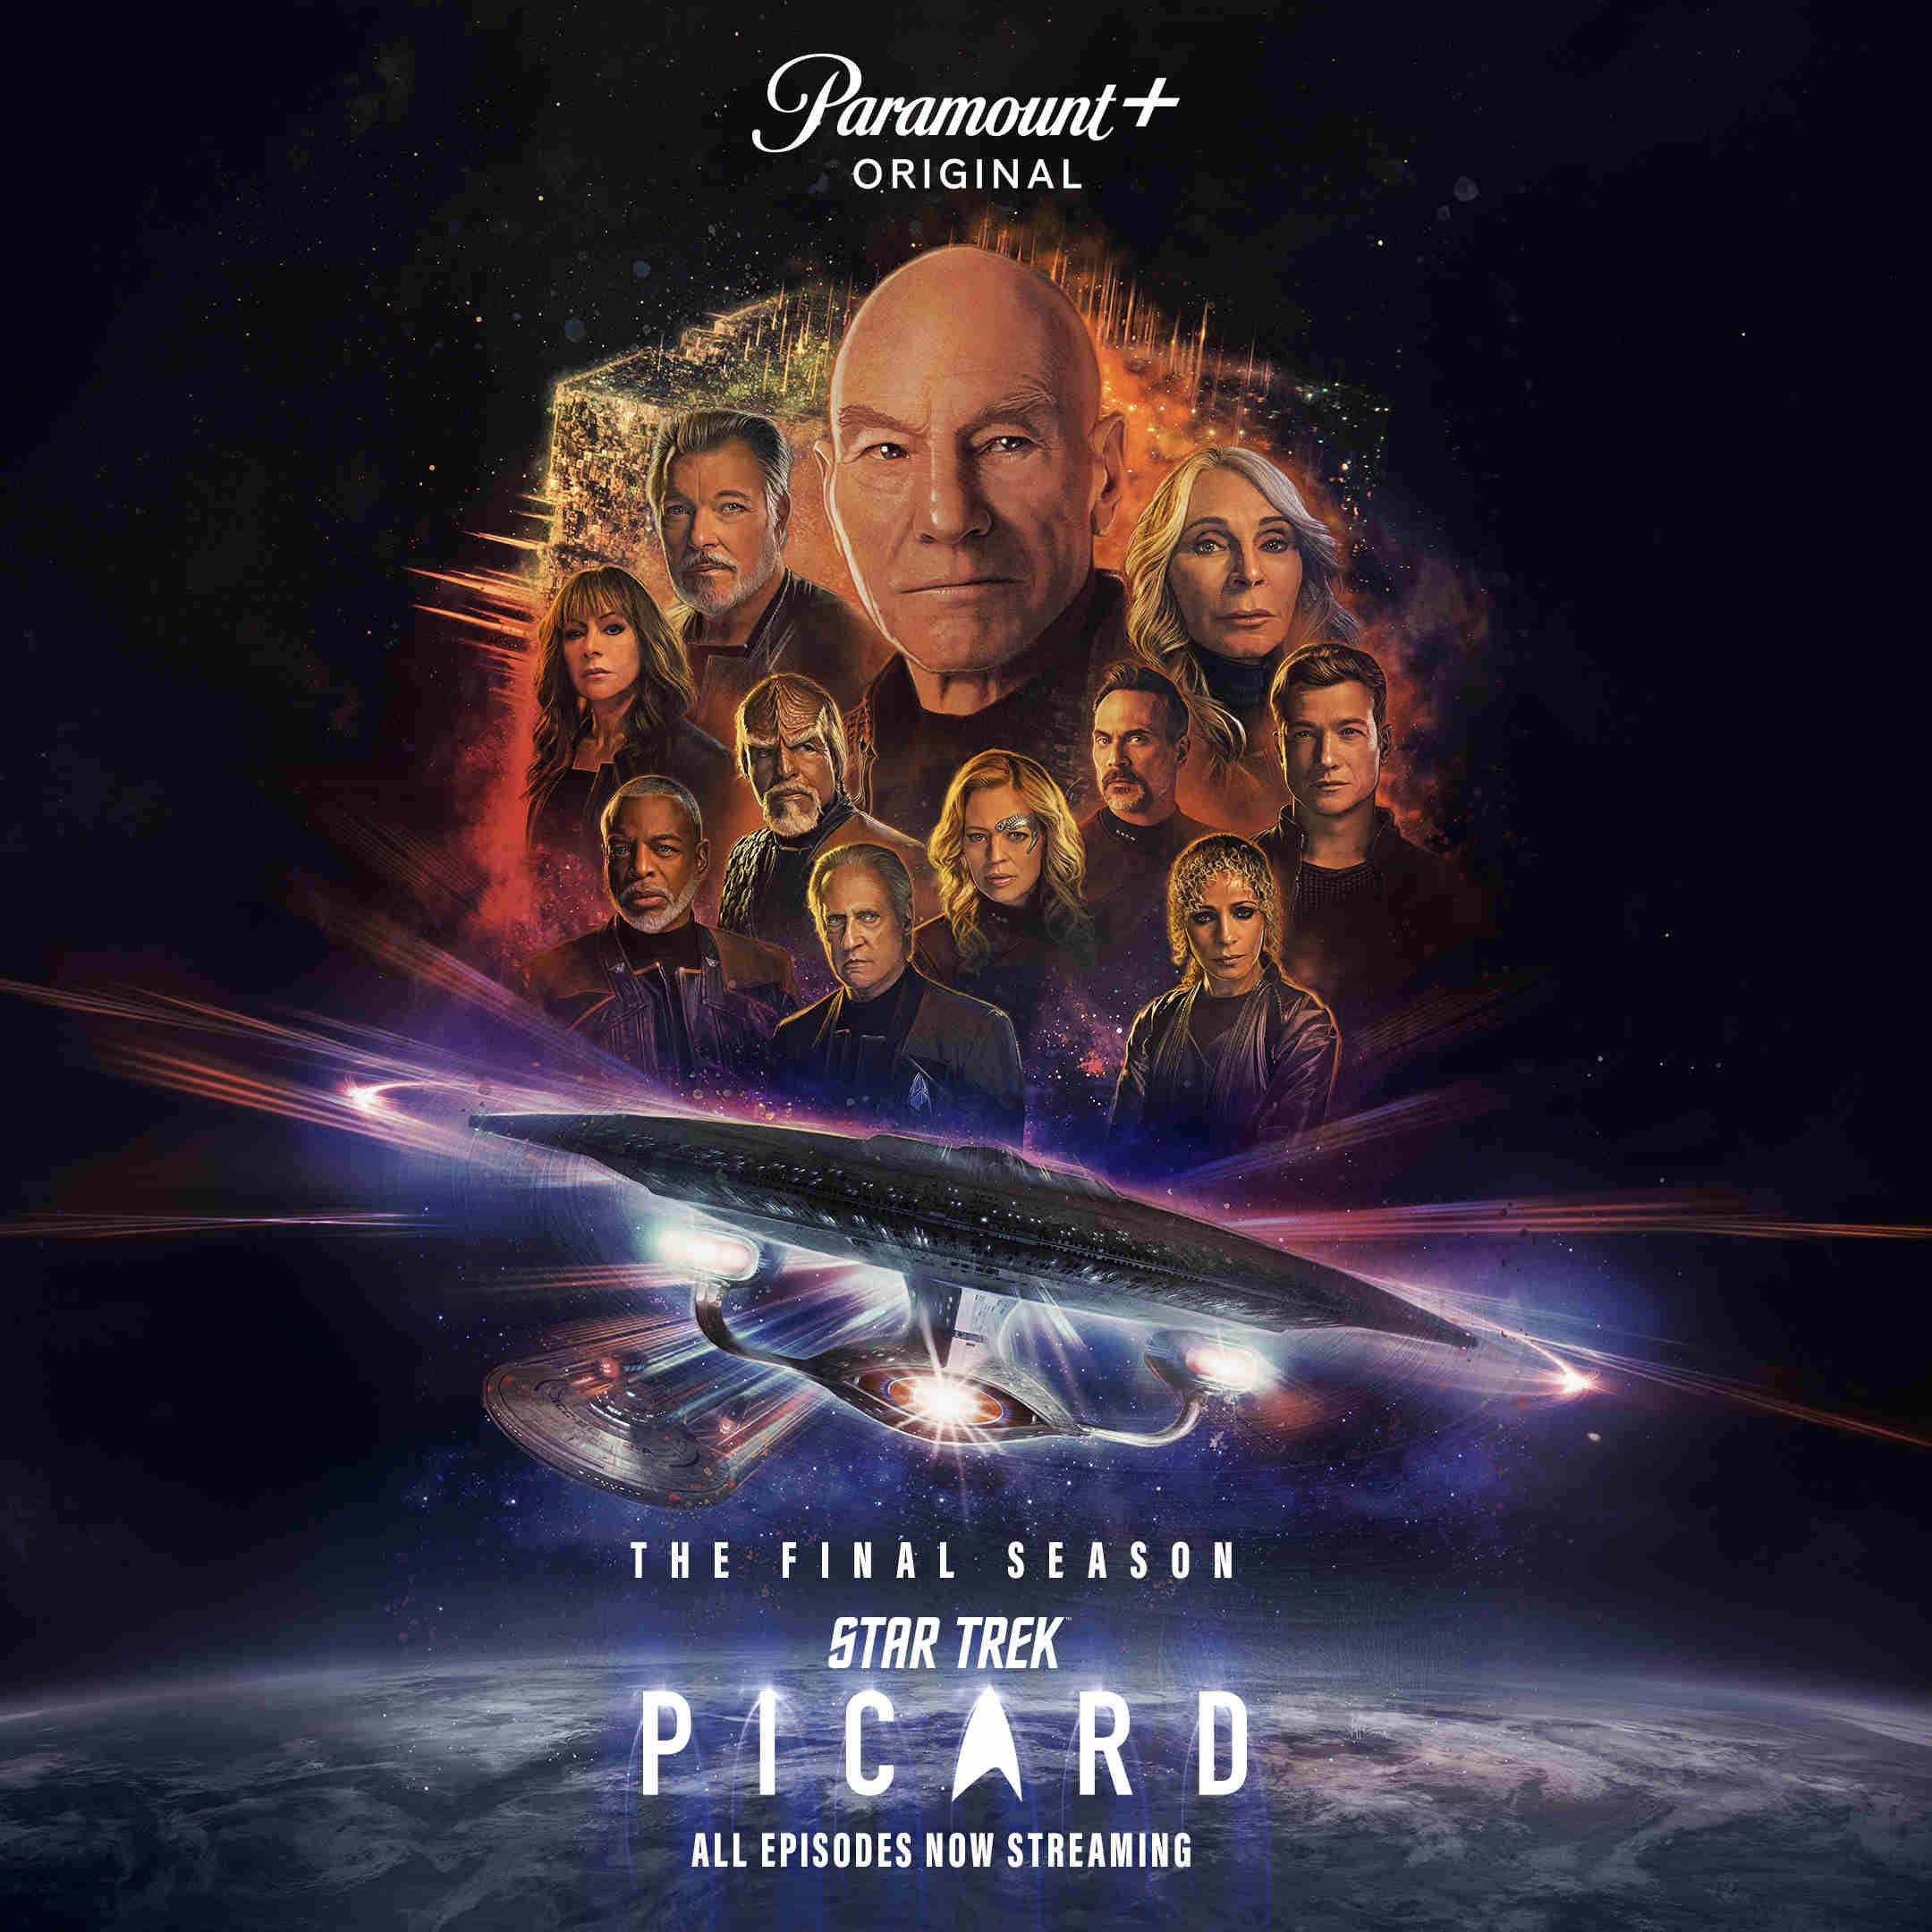 Star Trek: Picard Season 3 Gets Final Poster Featuring the